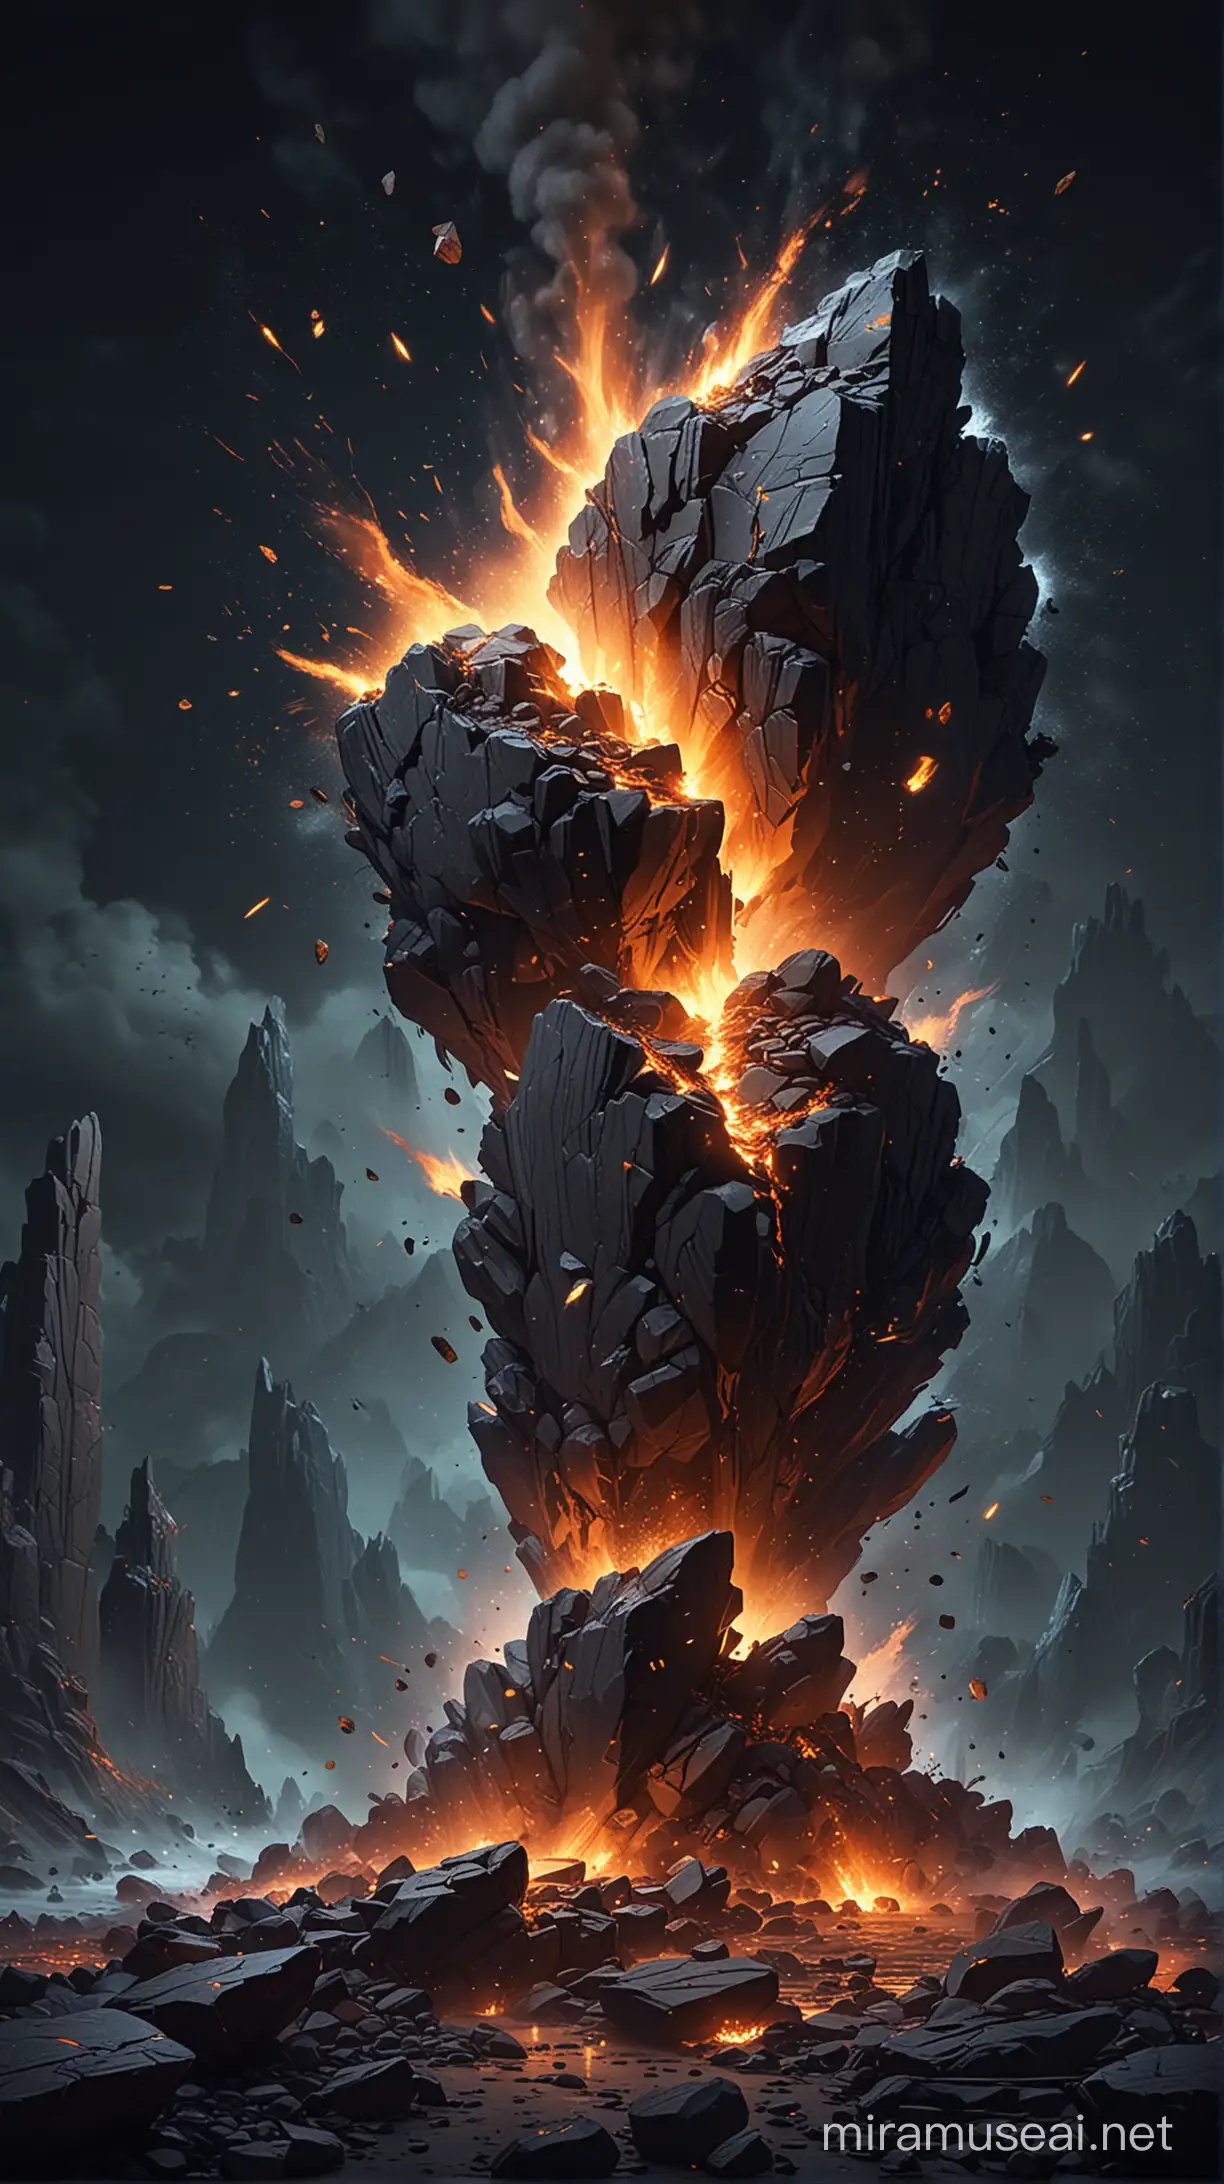 flying island hit by a huge rock in the night, shattered rocks and falling fire trails, dark background, side view,  low light, game art, digital painting, digital art, blizzard art style